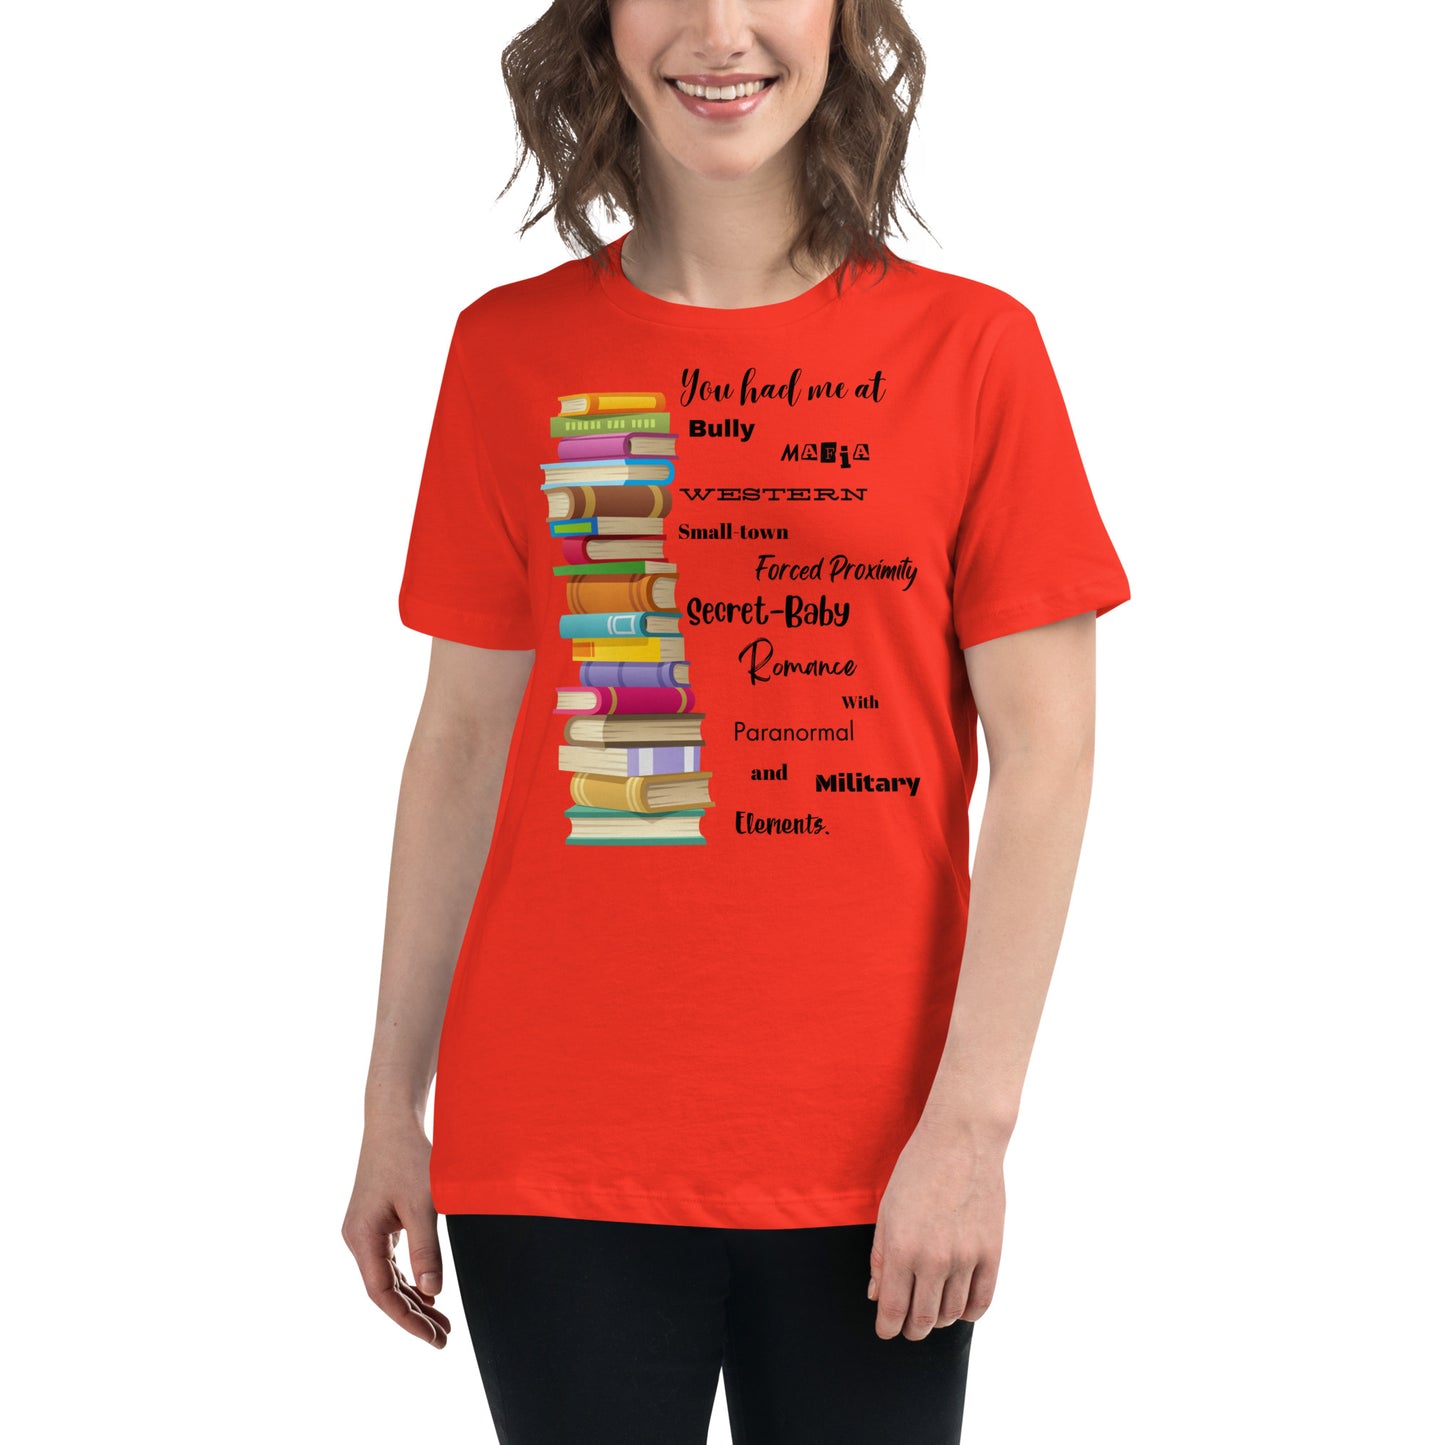 Women's Relaxed T-Shirt You had me at every genre